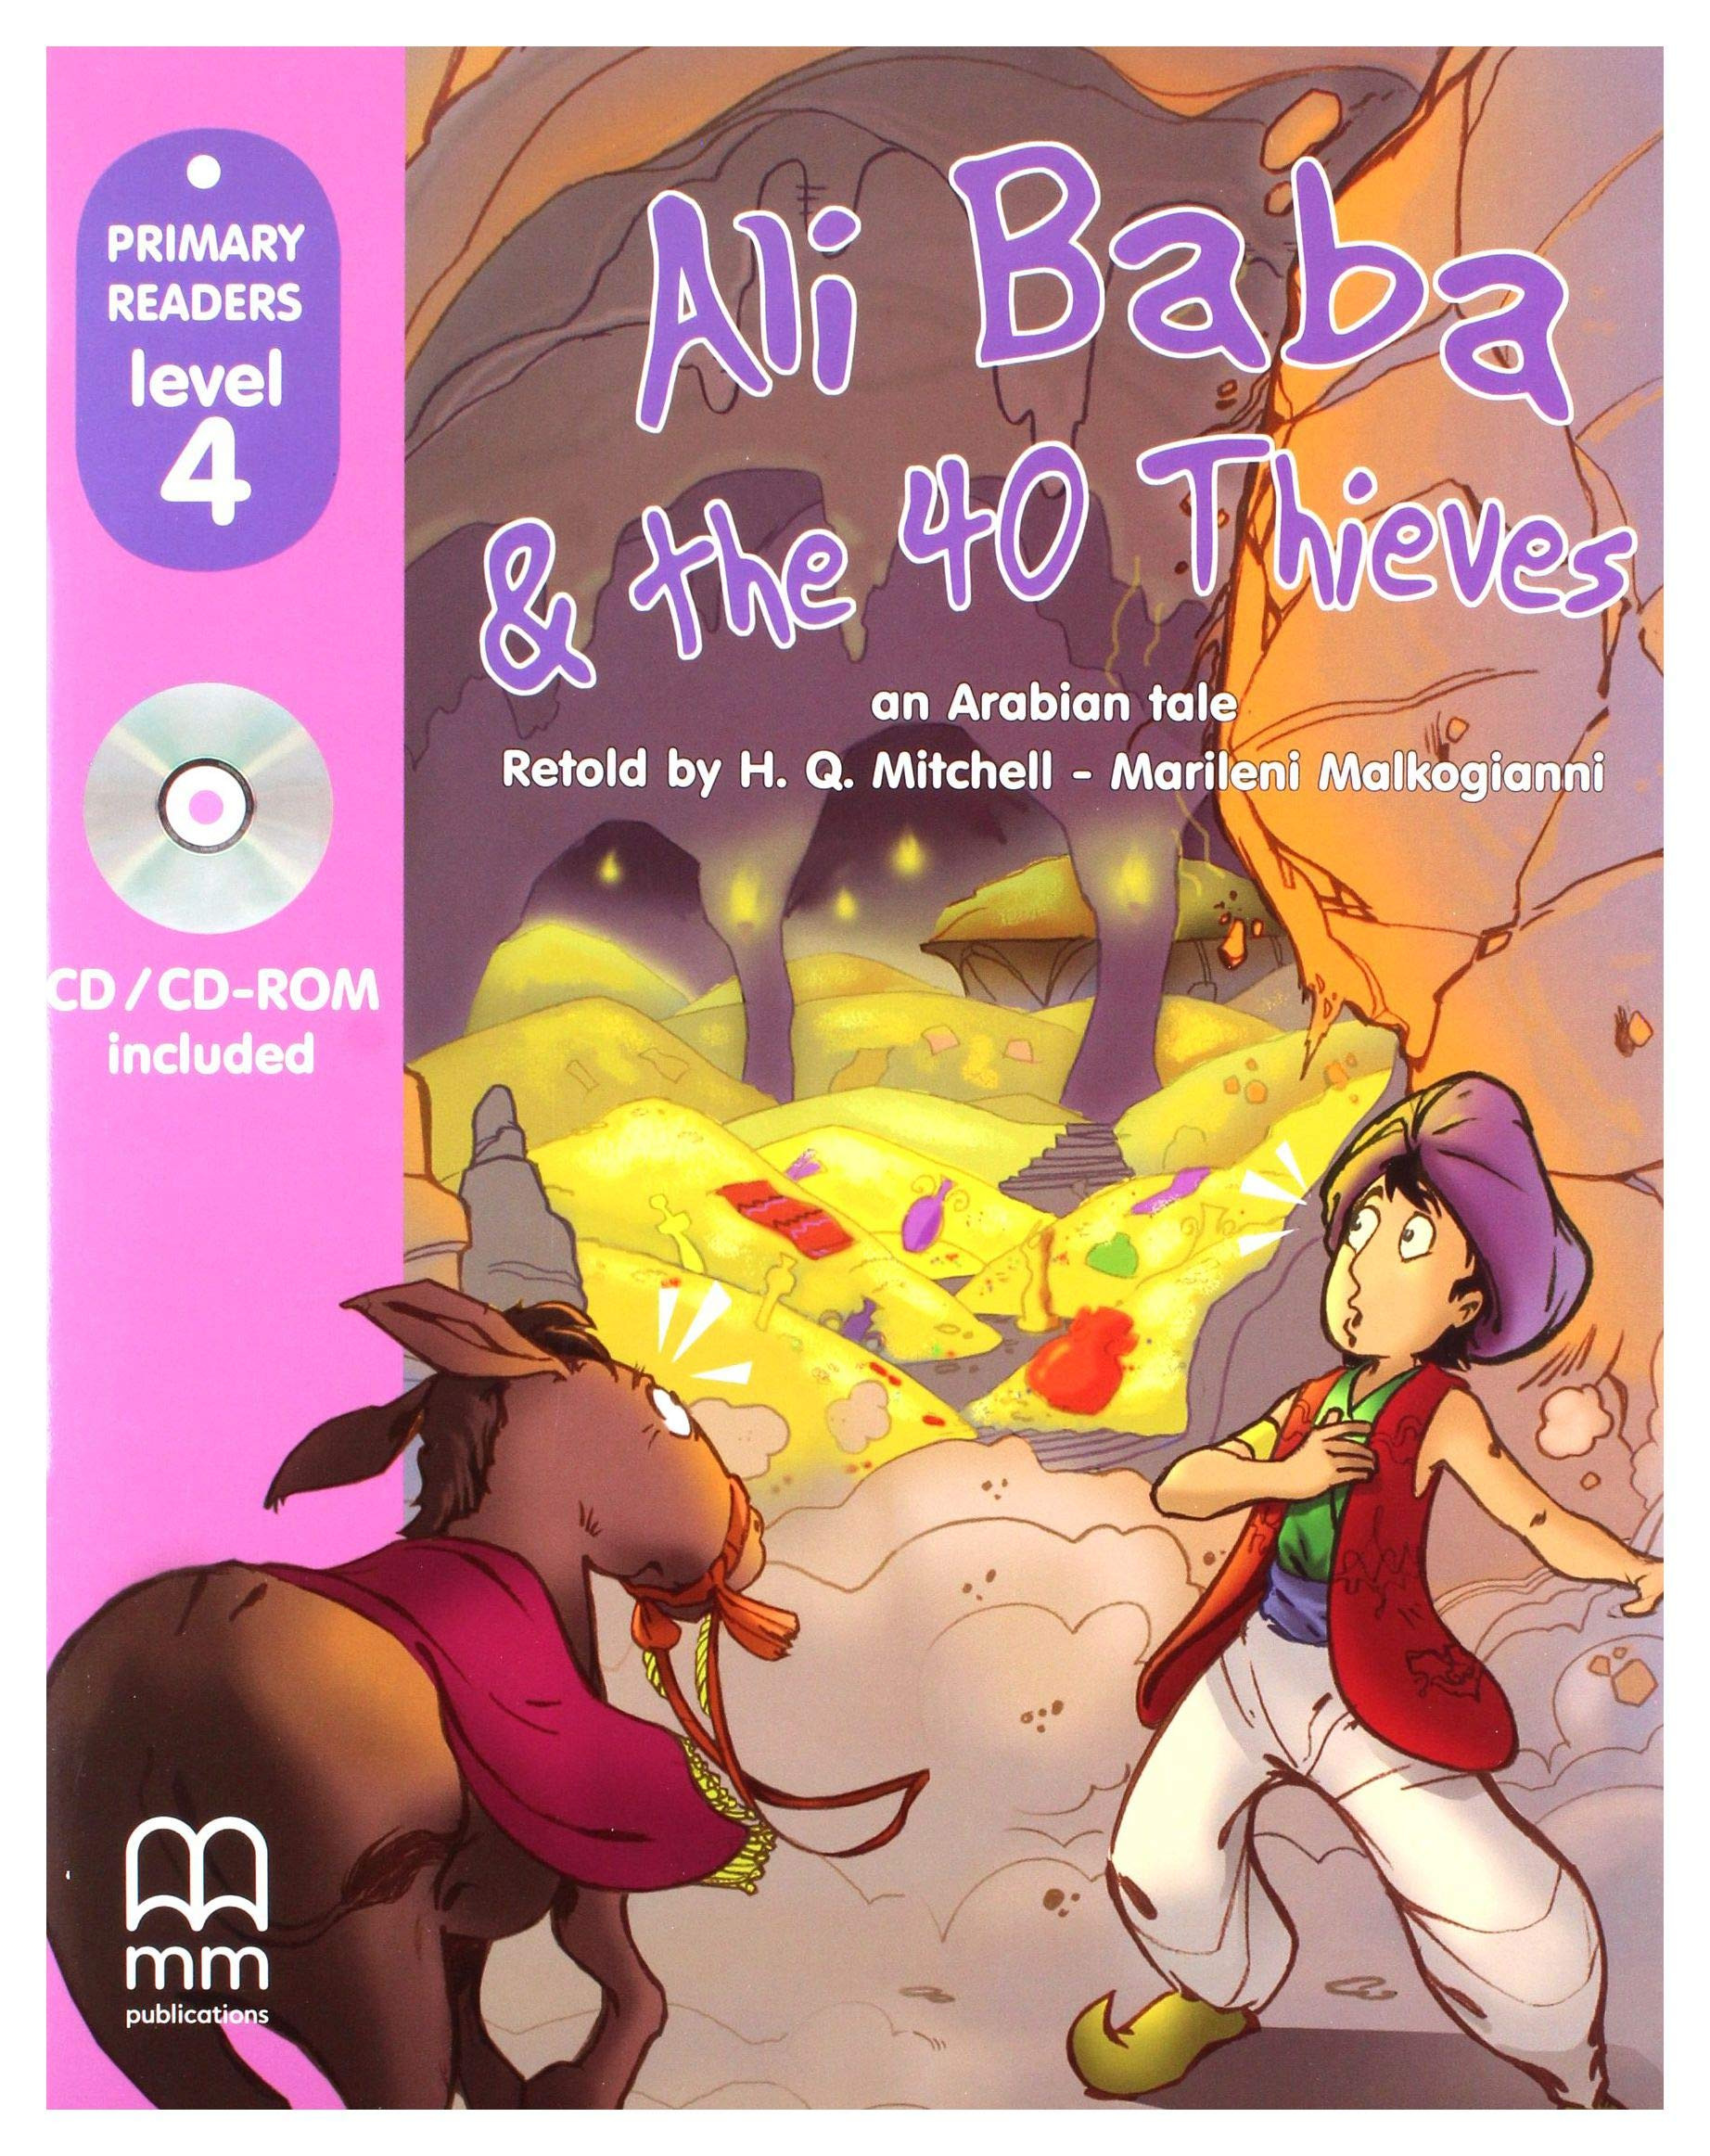 Ali Baba & the 40 thieves + CD